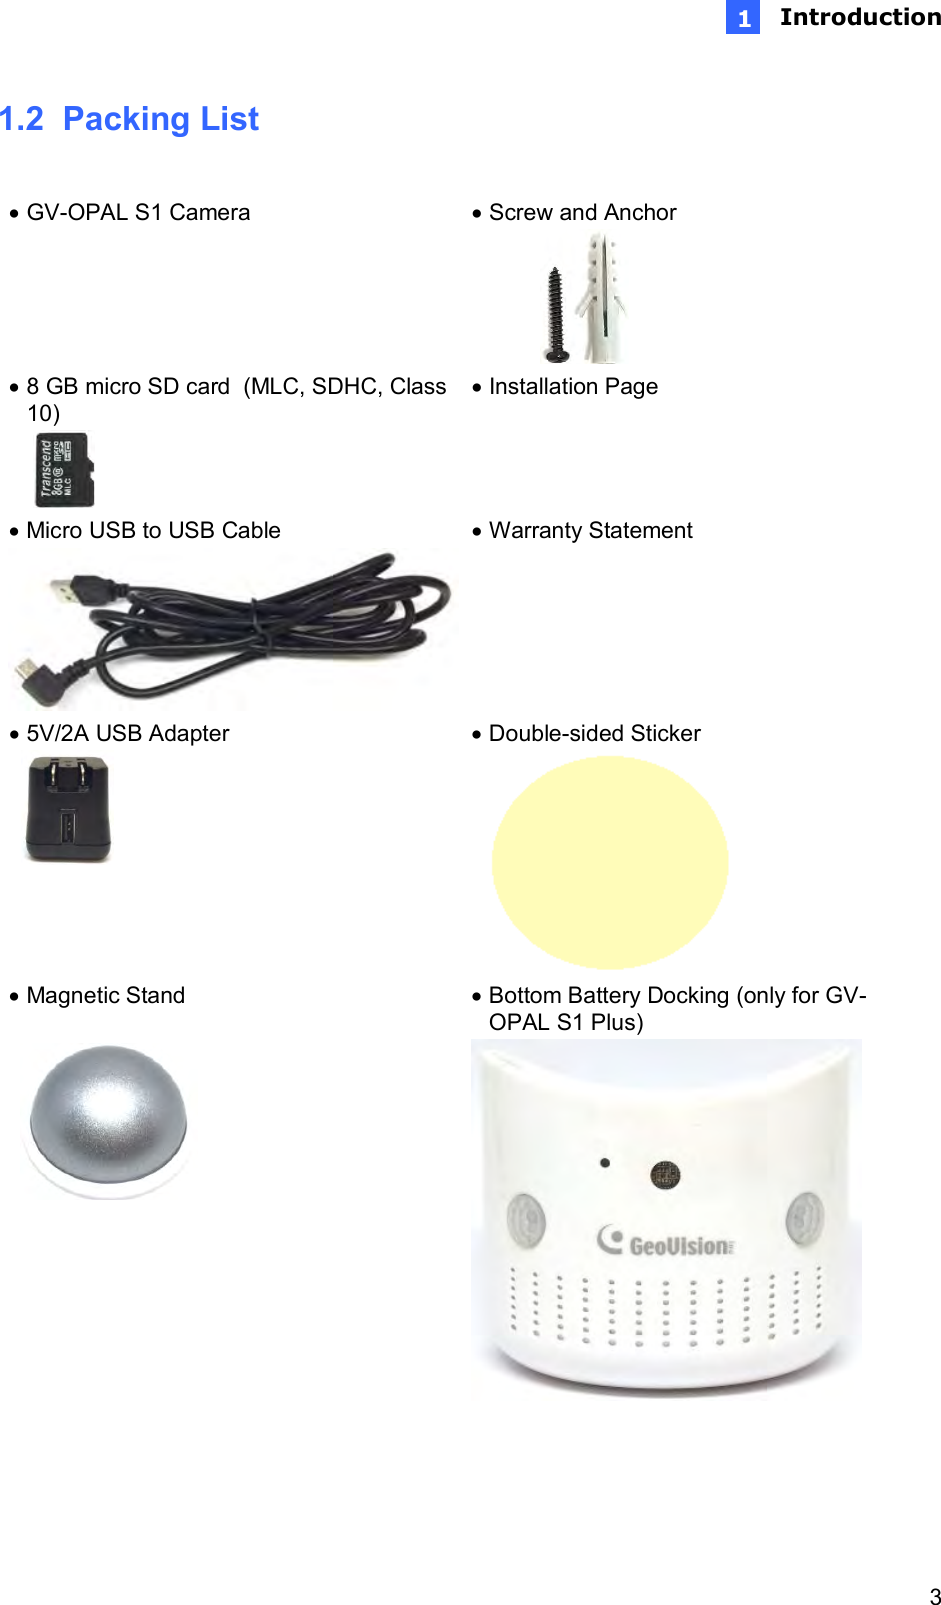  Introduction   3 1n1.2  Packing List     GV-OPAL S1 Camera   Screw and Anchor   8 GB micro SD card  (MLC, SDHC, Class 10)   Installation Page   Micro USB to USB Cable   Warranty Statement   5V/2A USB Adapter   Double-sided Sticker   Magnetic Stand    Bottom Battery Docking (only for GV-OPAL S1 Plus)   